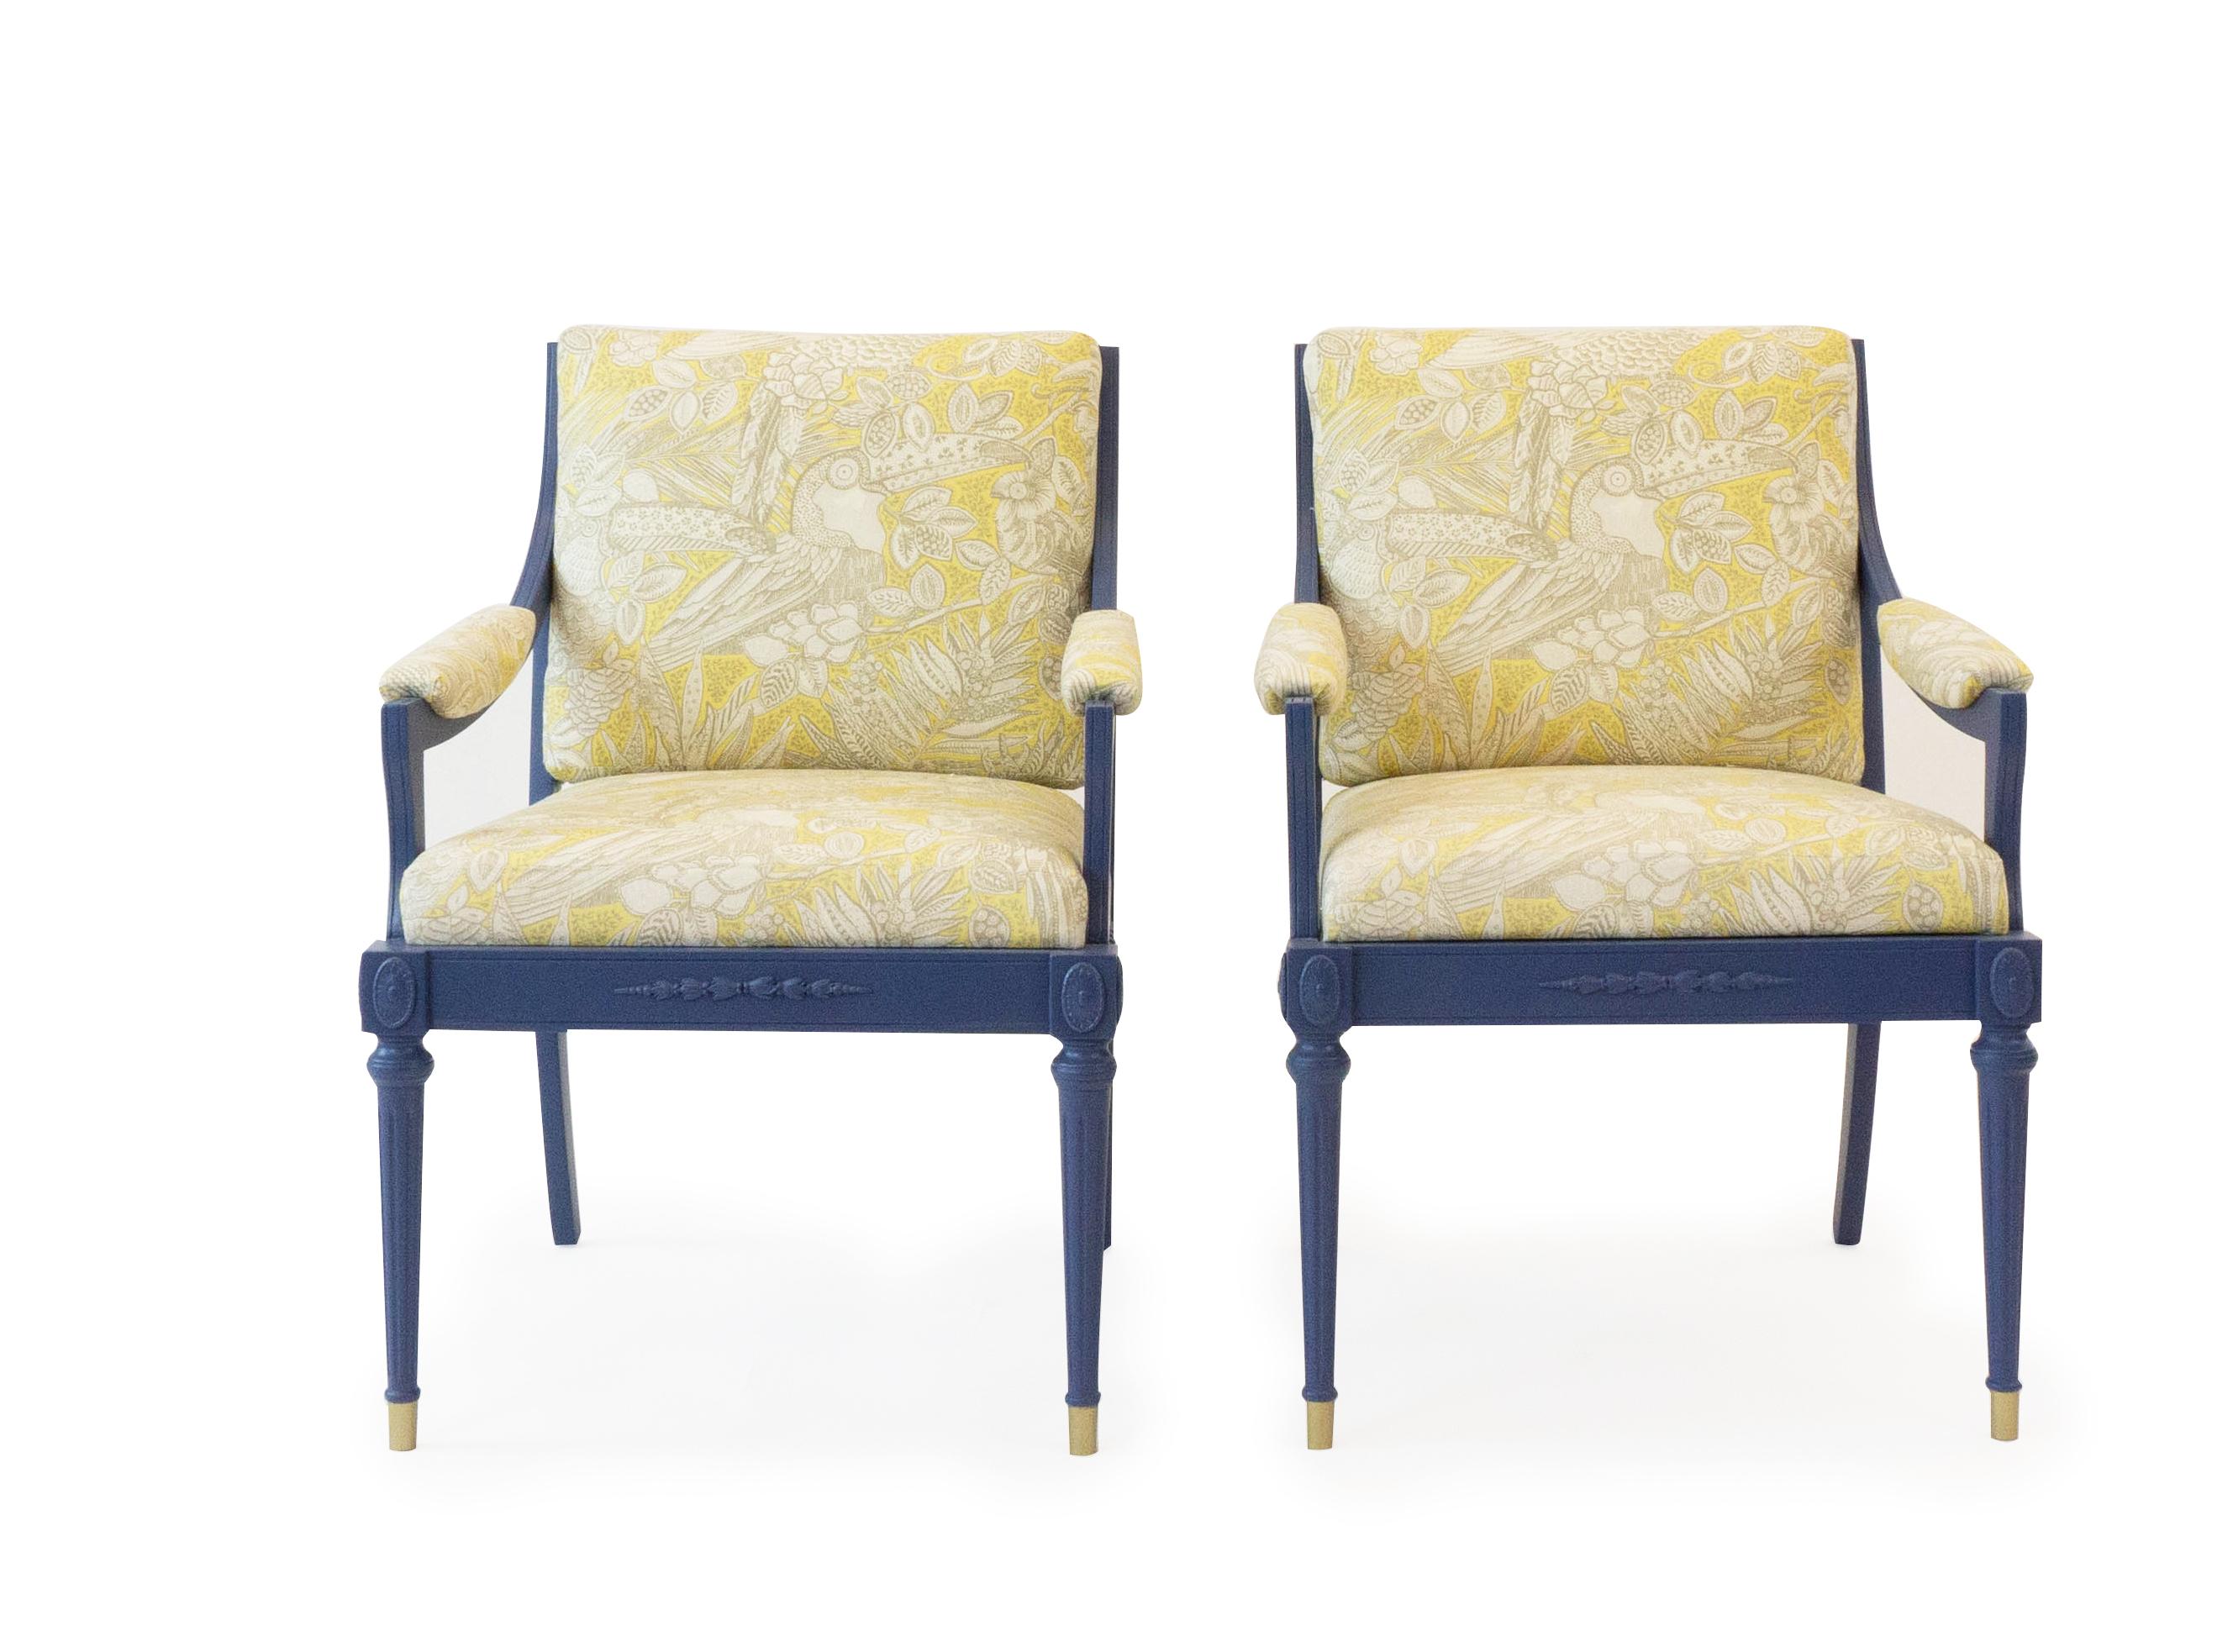 This pair of vintage Hollywood Regency chairs have been newly lacquered in farrow and ball pitch blue and upholstered in Jim Thompson's Amazonia / Lemon Verbena fabric. The upholstered fabric is a yellow and white print featuring tropical florals